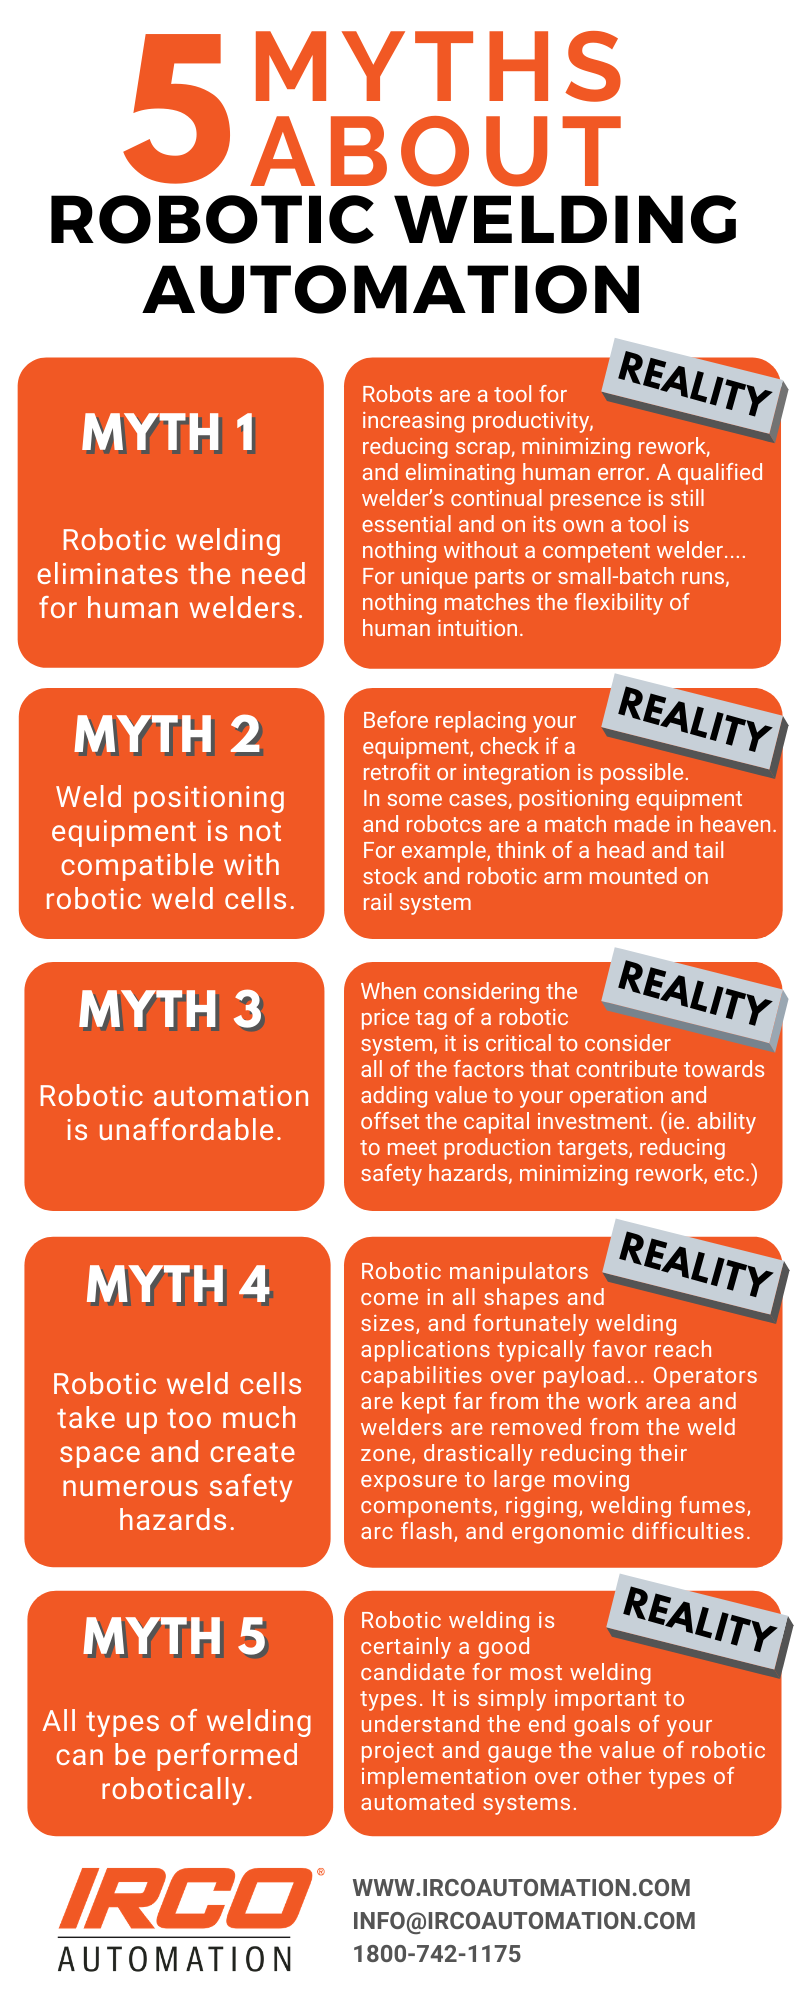 5 myths about robotic welding automation